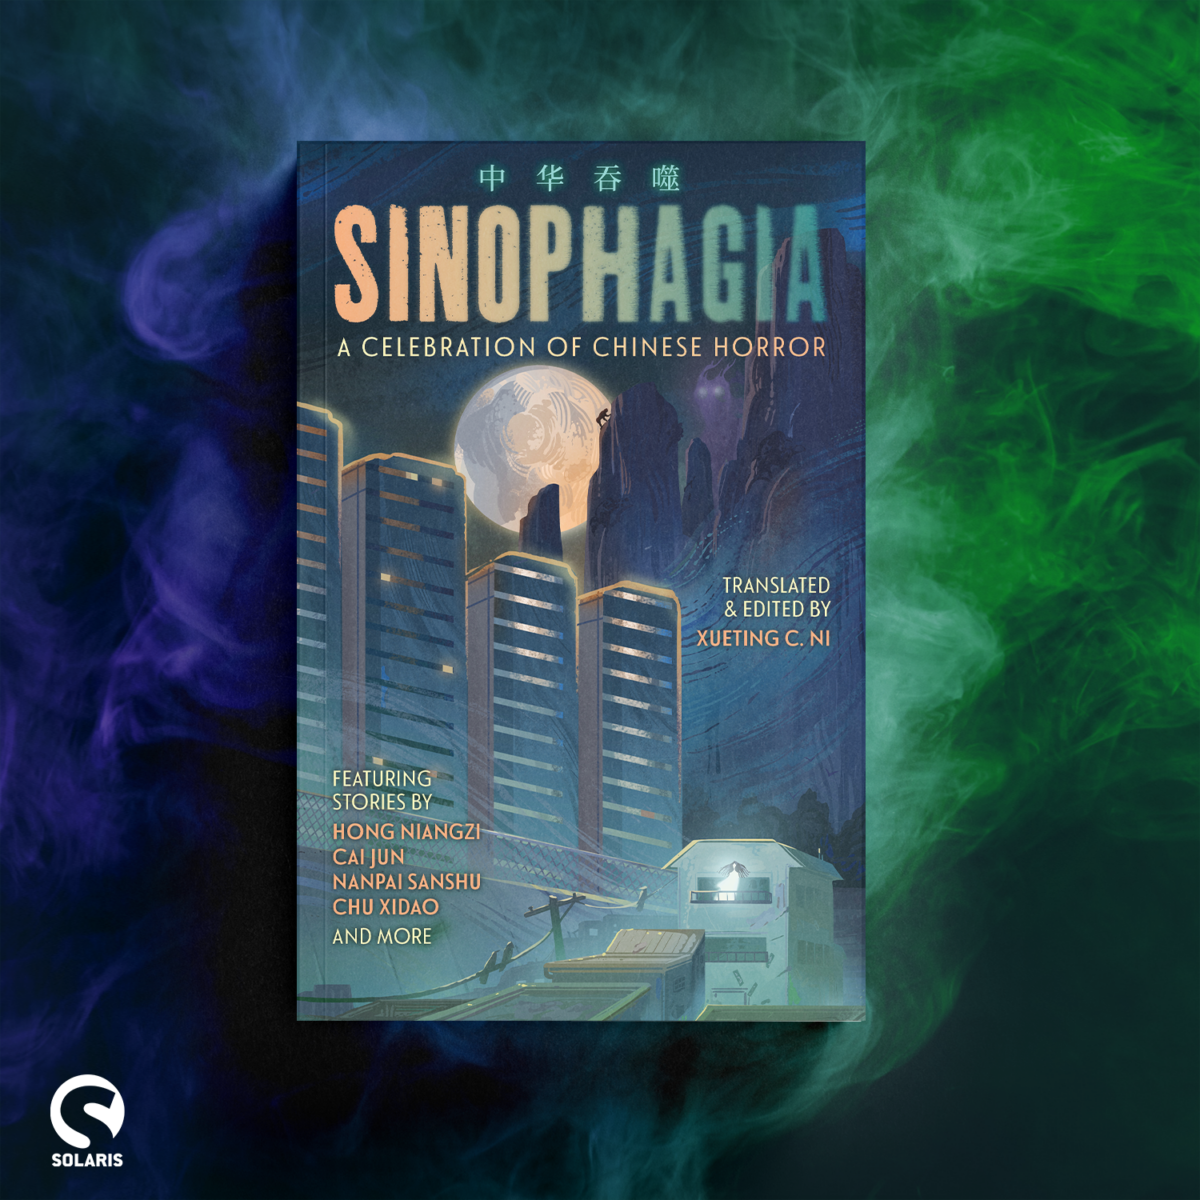 Revealing the cover of Sinophagia ed. by Xueting C. Ni